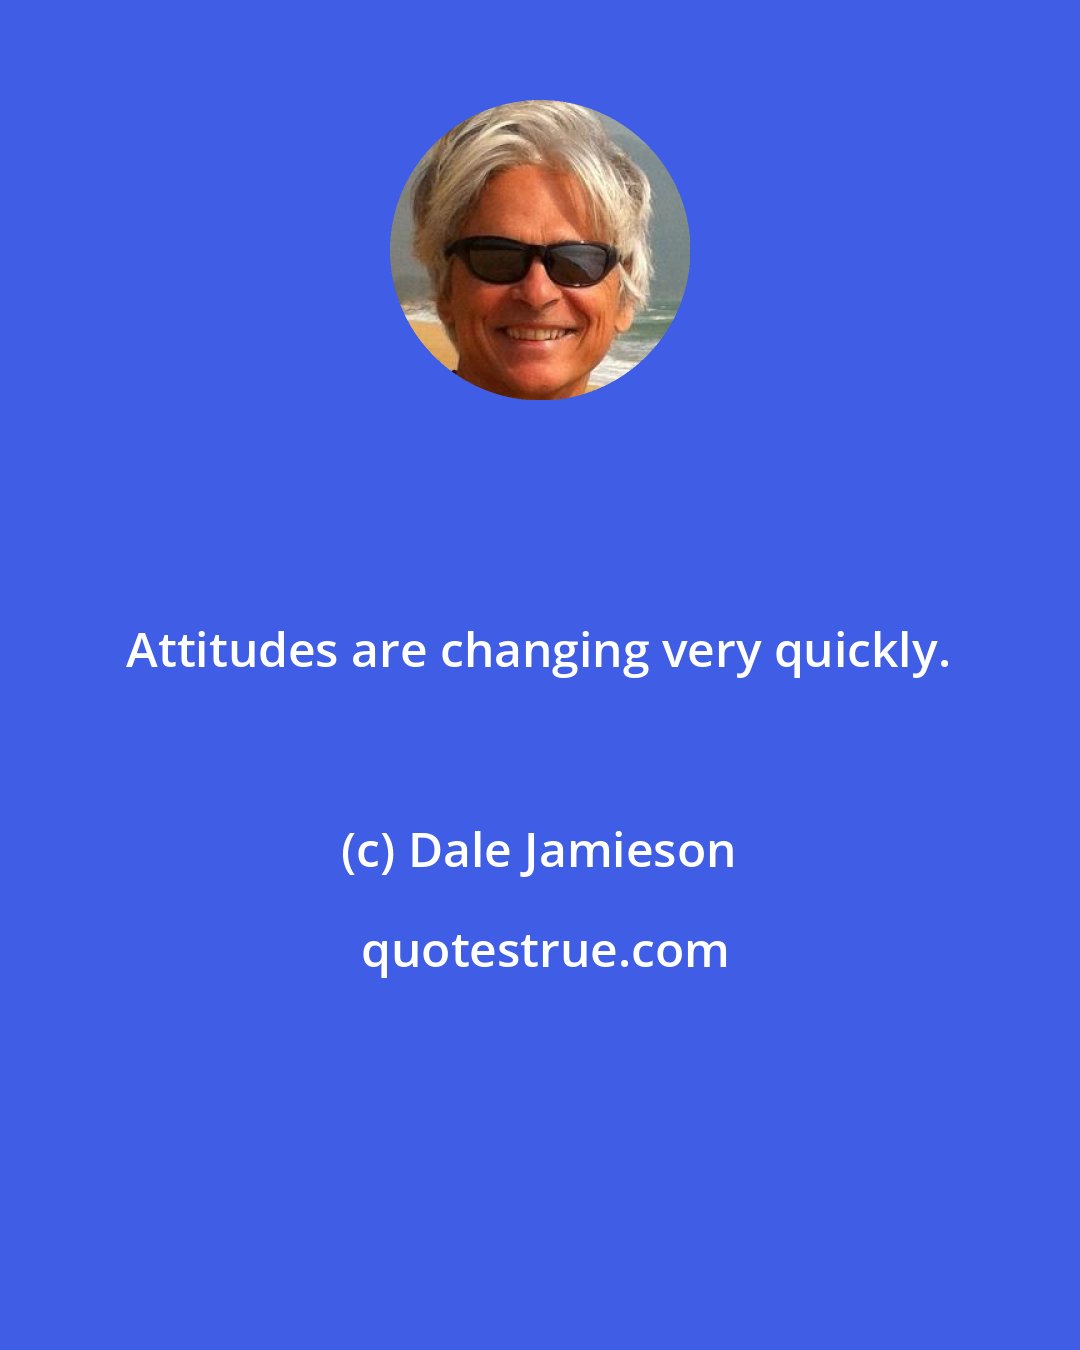 Dale Jamieson: Attitudes are changing very quickly.